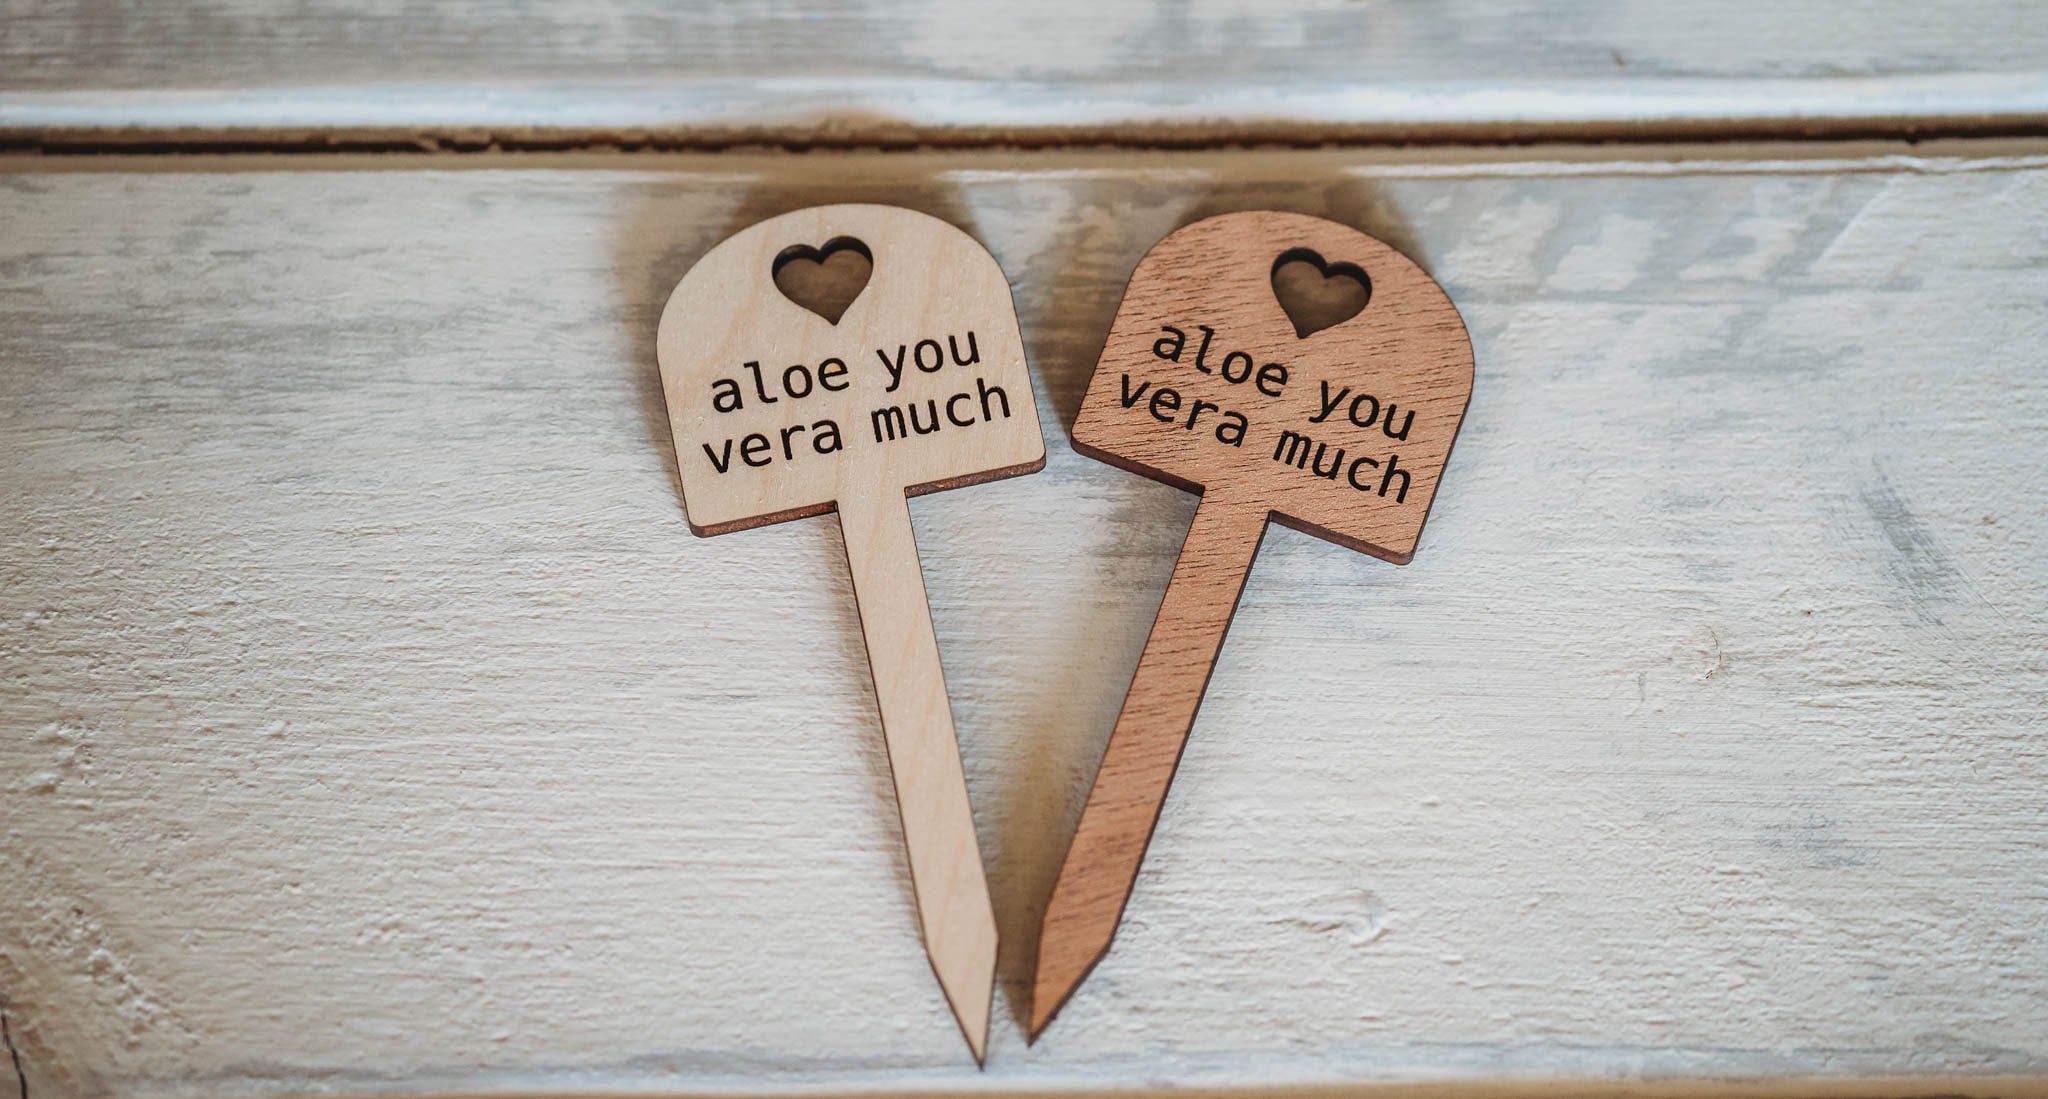 Two wooden plant markers with a heart-shaped top, both inscribed with the phrase 'aloe you vera much', are placed on a light wooden textured surface with a slight rustic appearance.